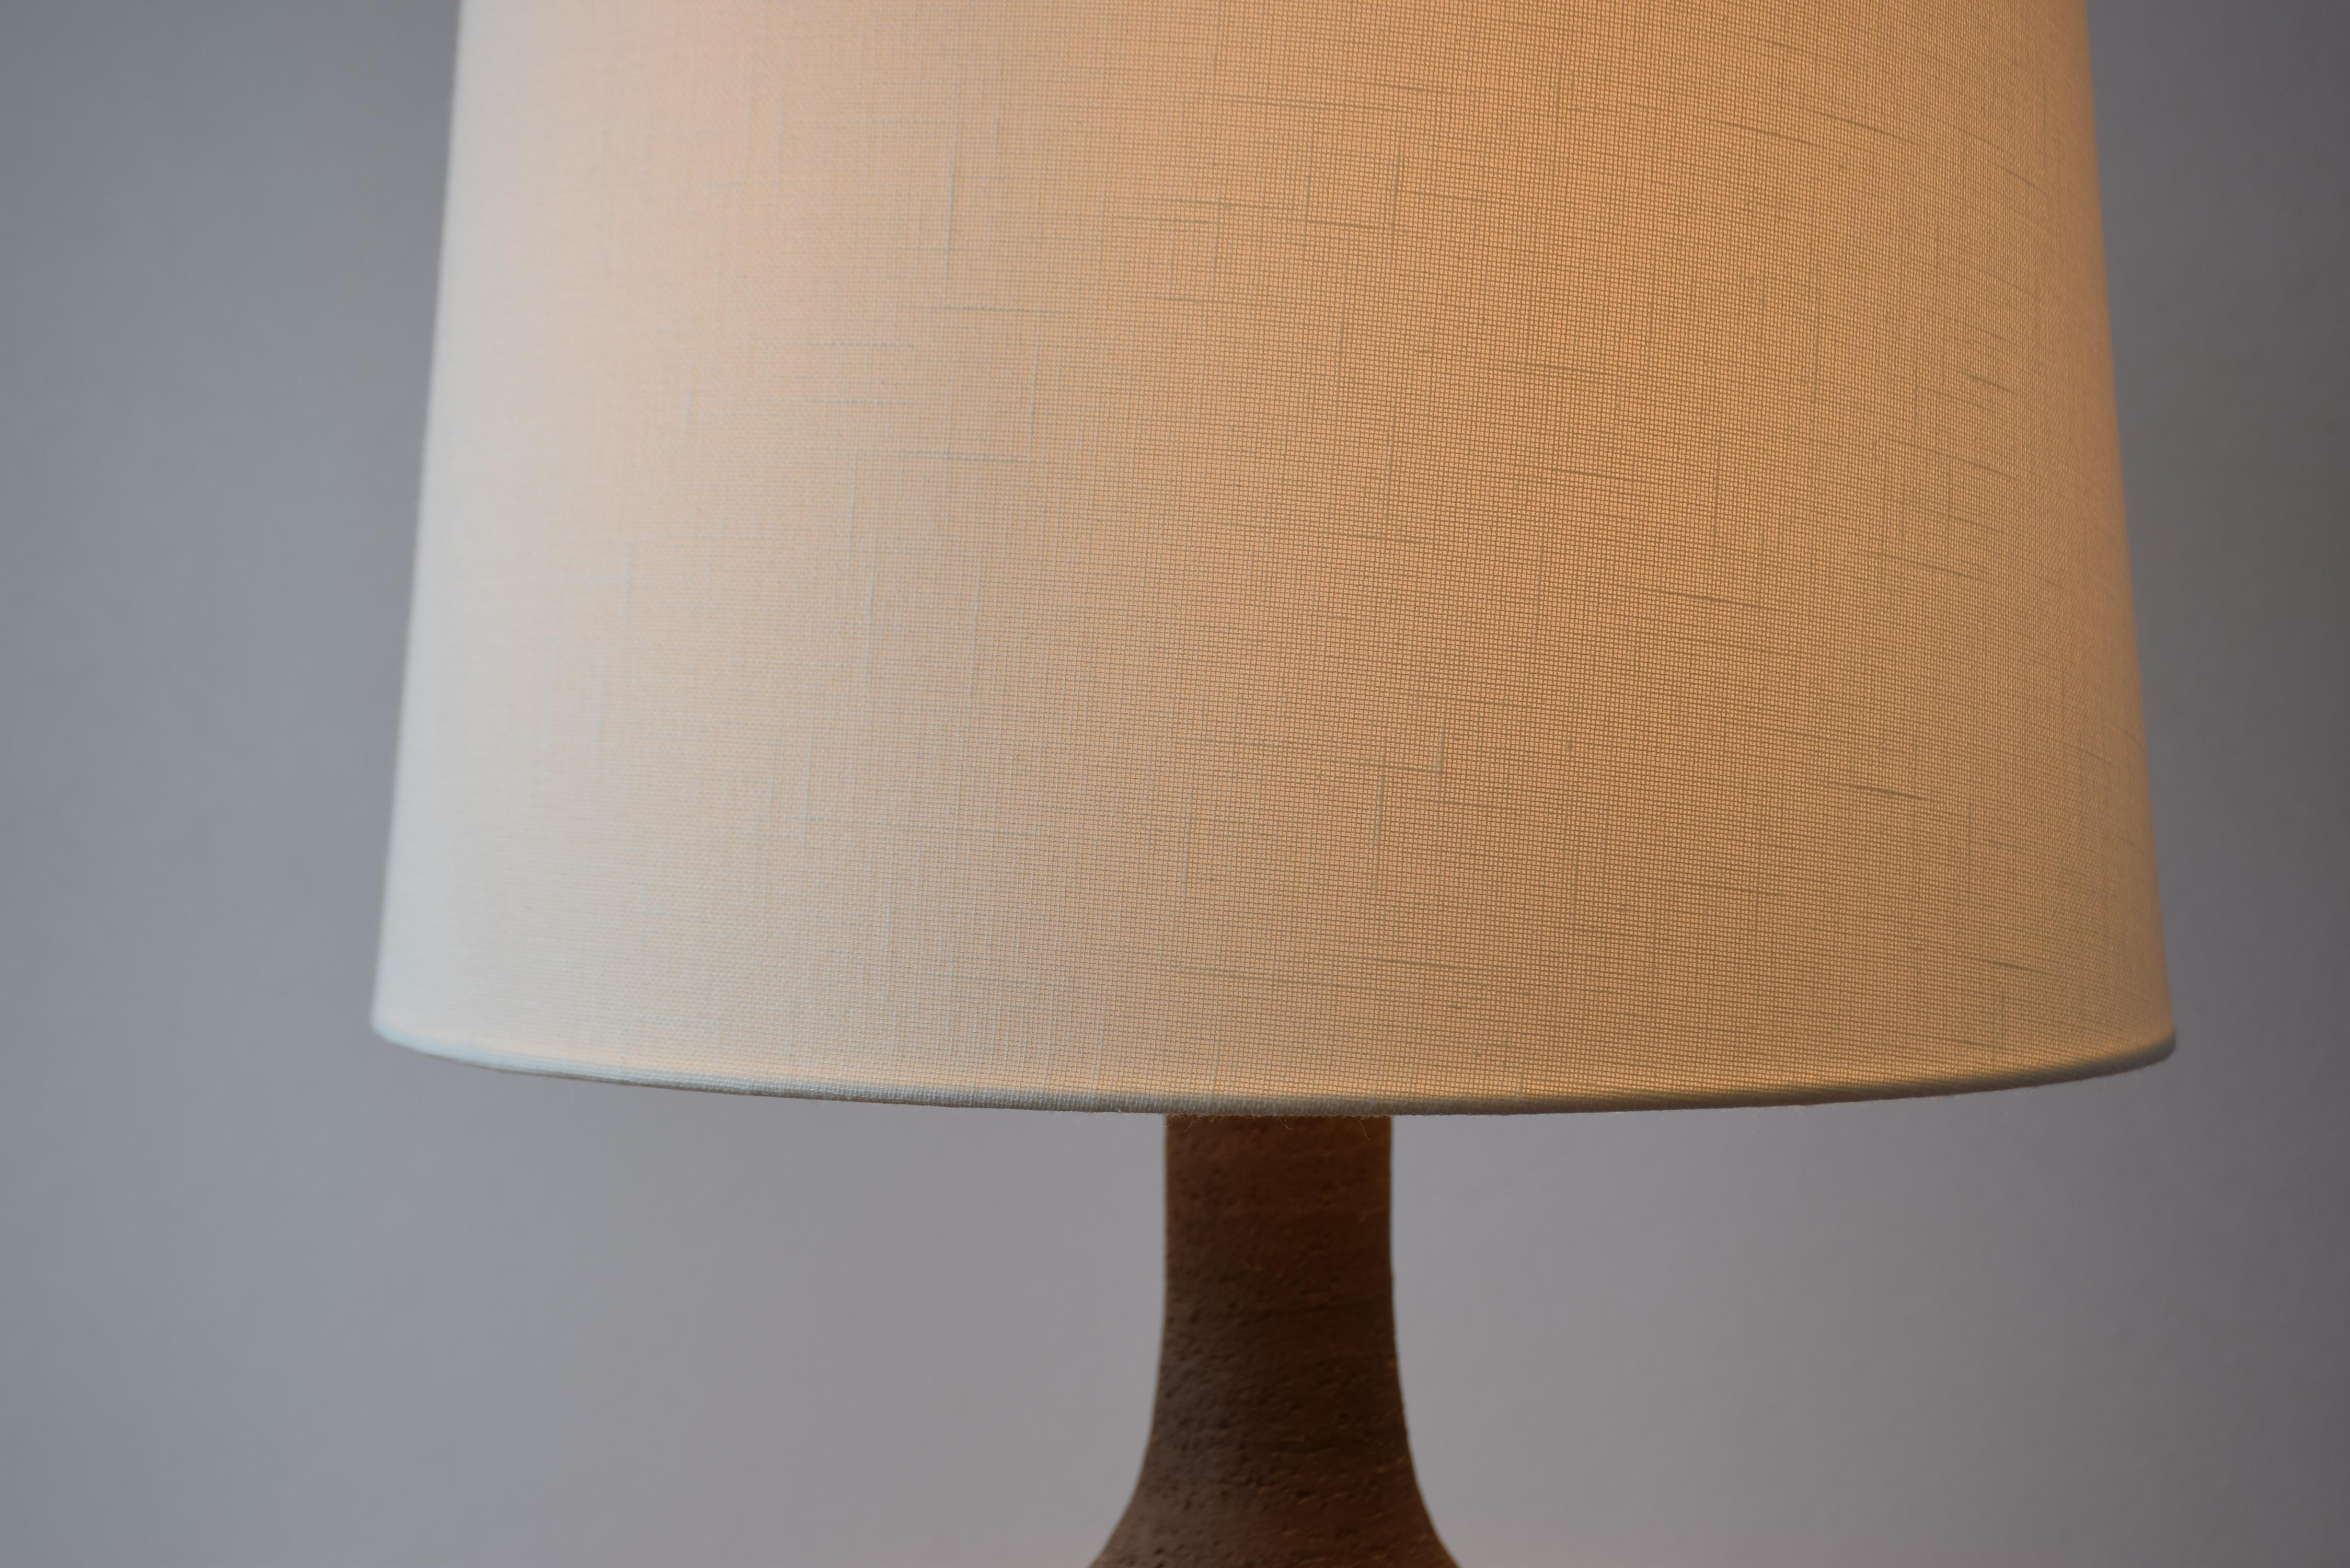 Danish Tall Sculptural Table Lamp Blue & Brown by Jette Hellerøe, Ceramic 1970s For Sale 7